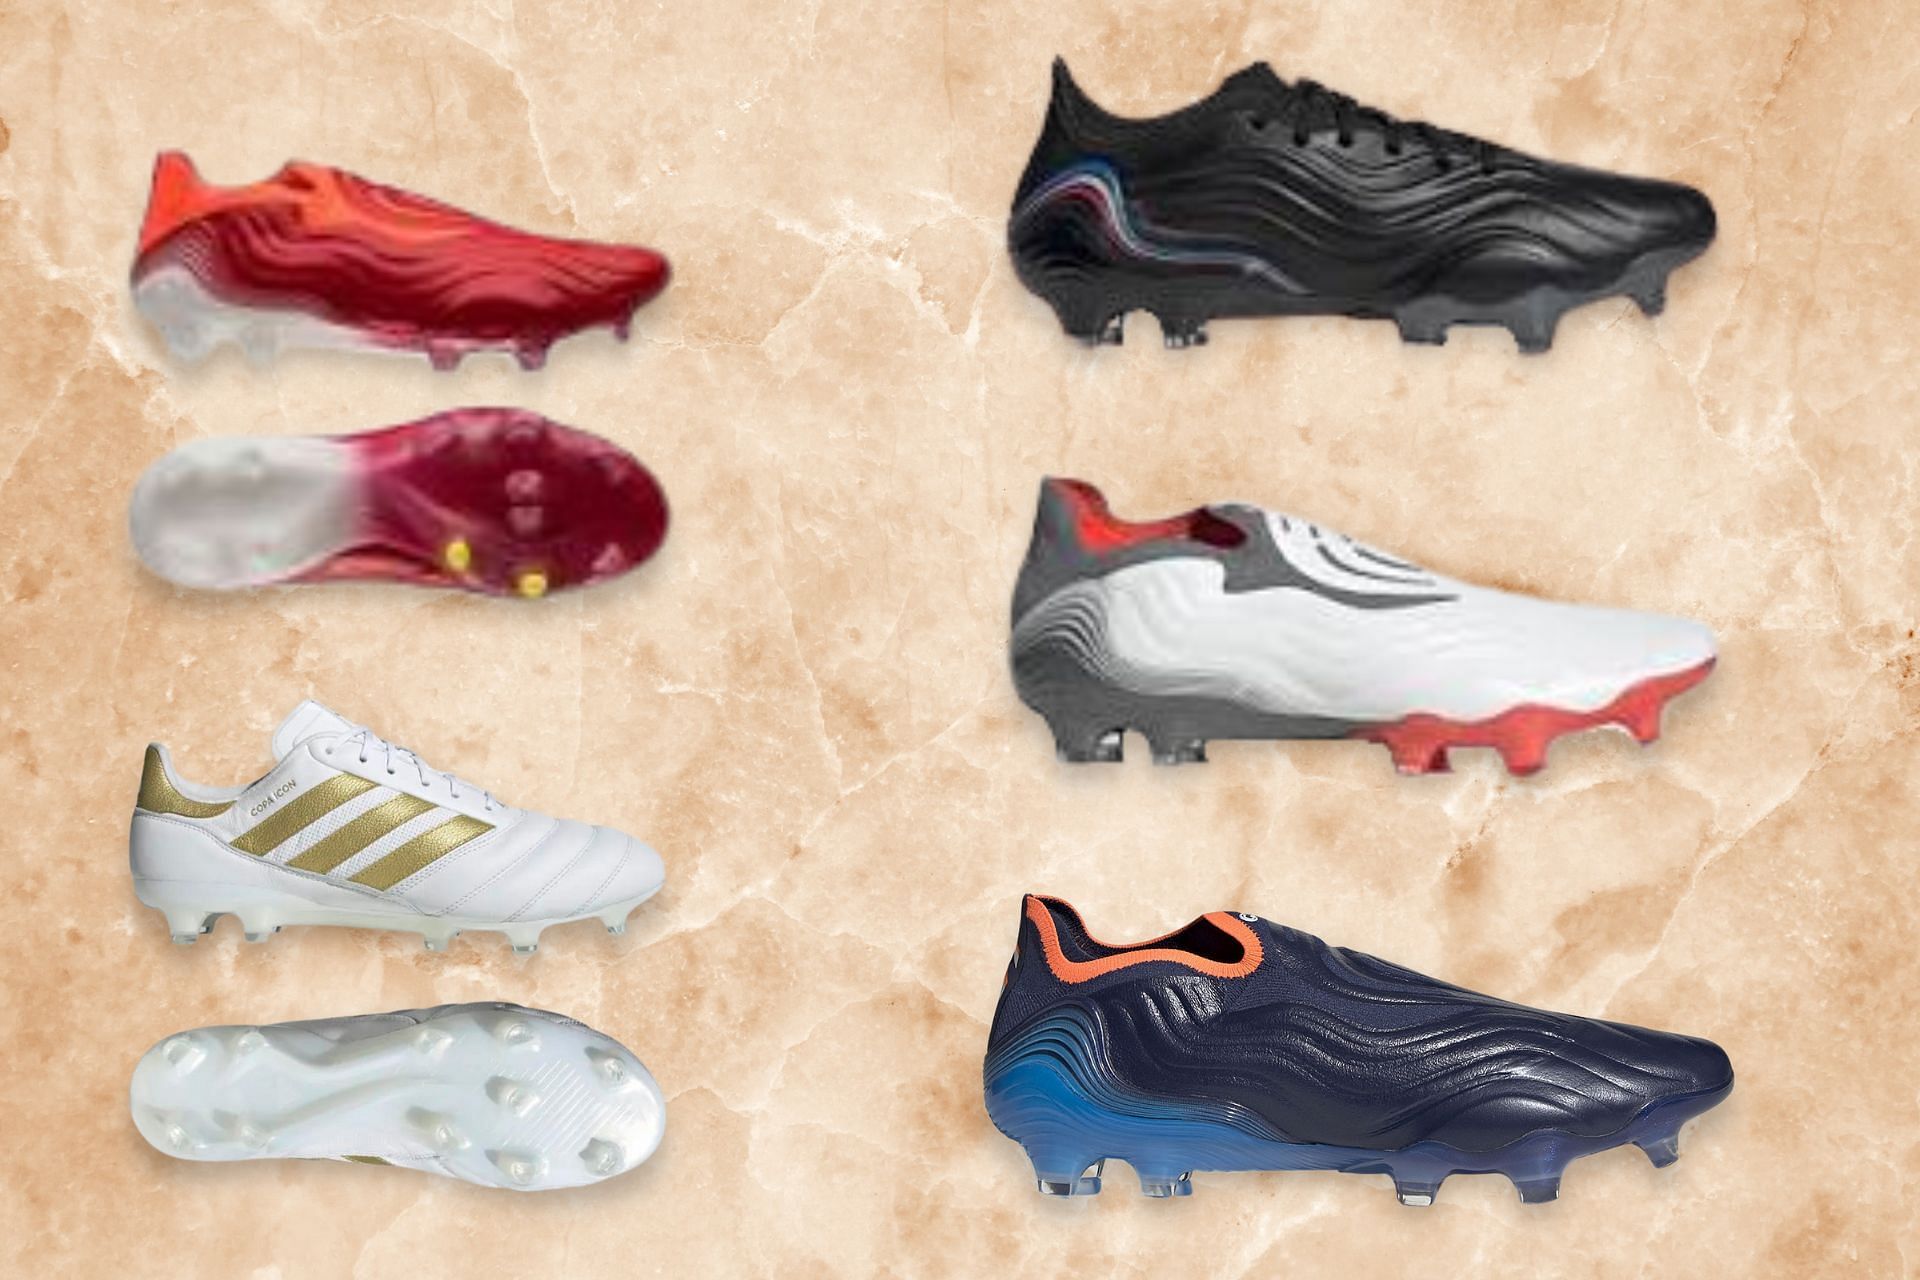 5 Adidas Sense football boots colorways launched in 2022